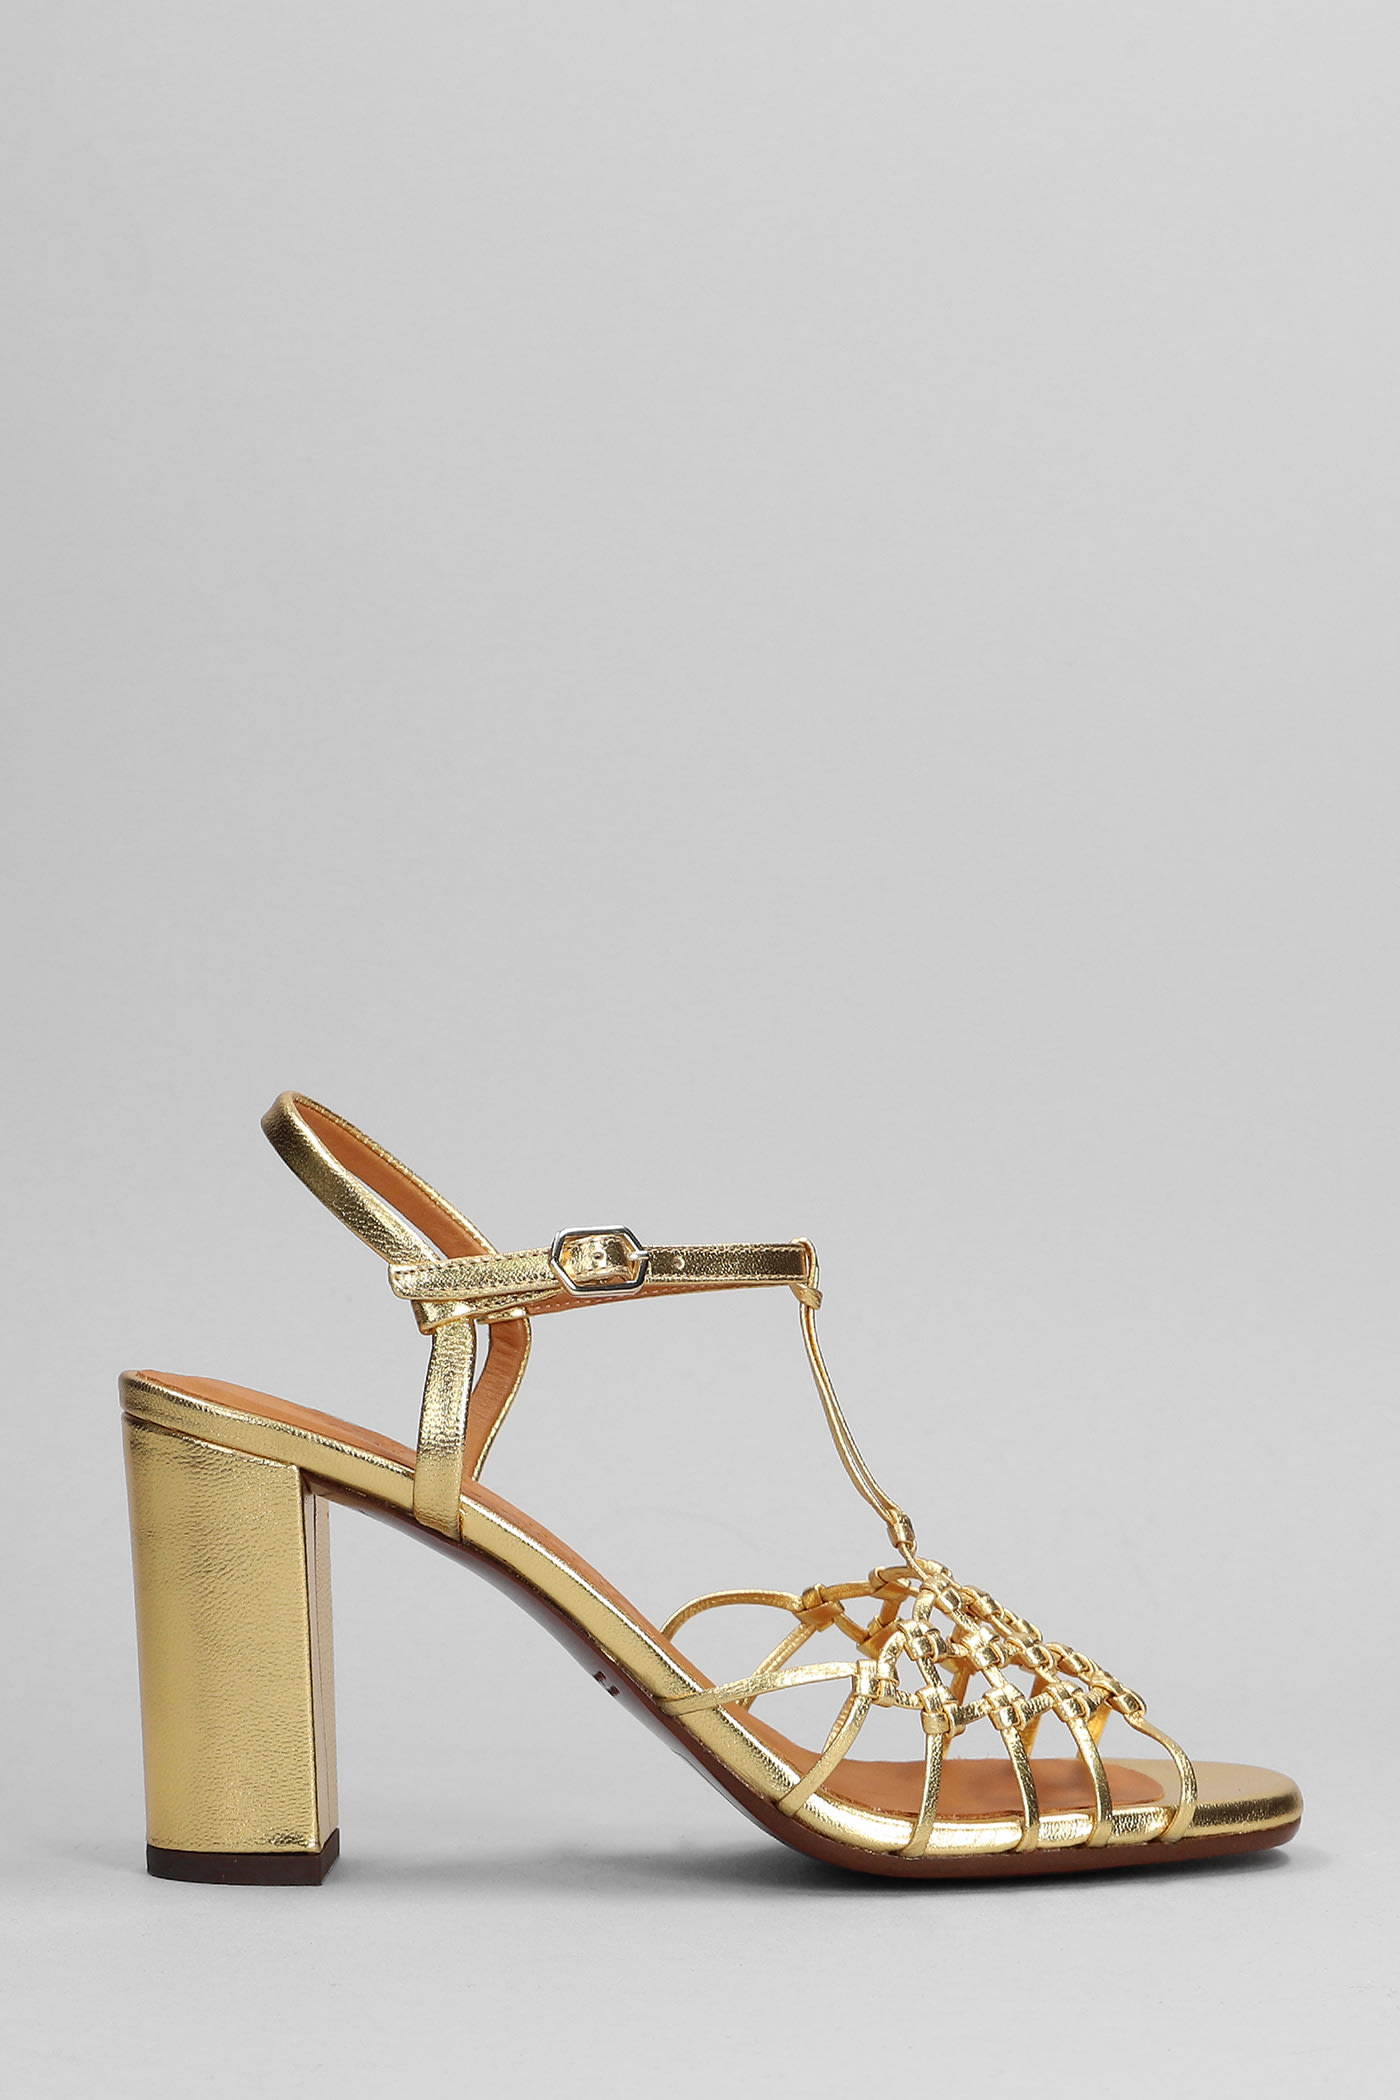 Chie Mihara Bassi Sandals In Gold Leather